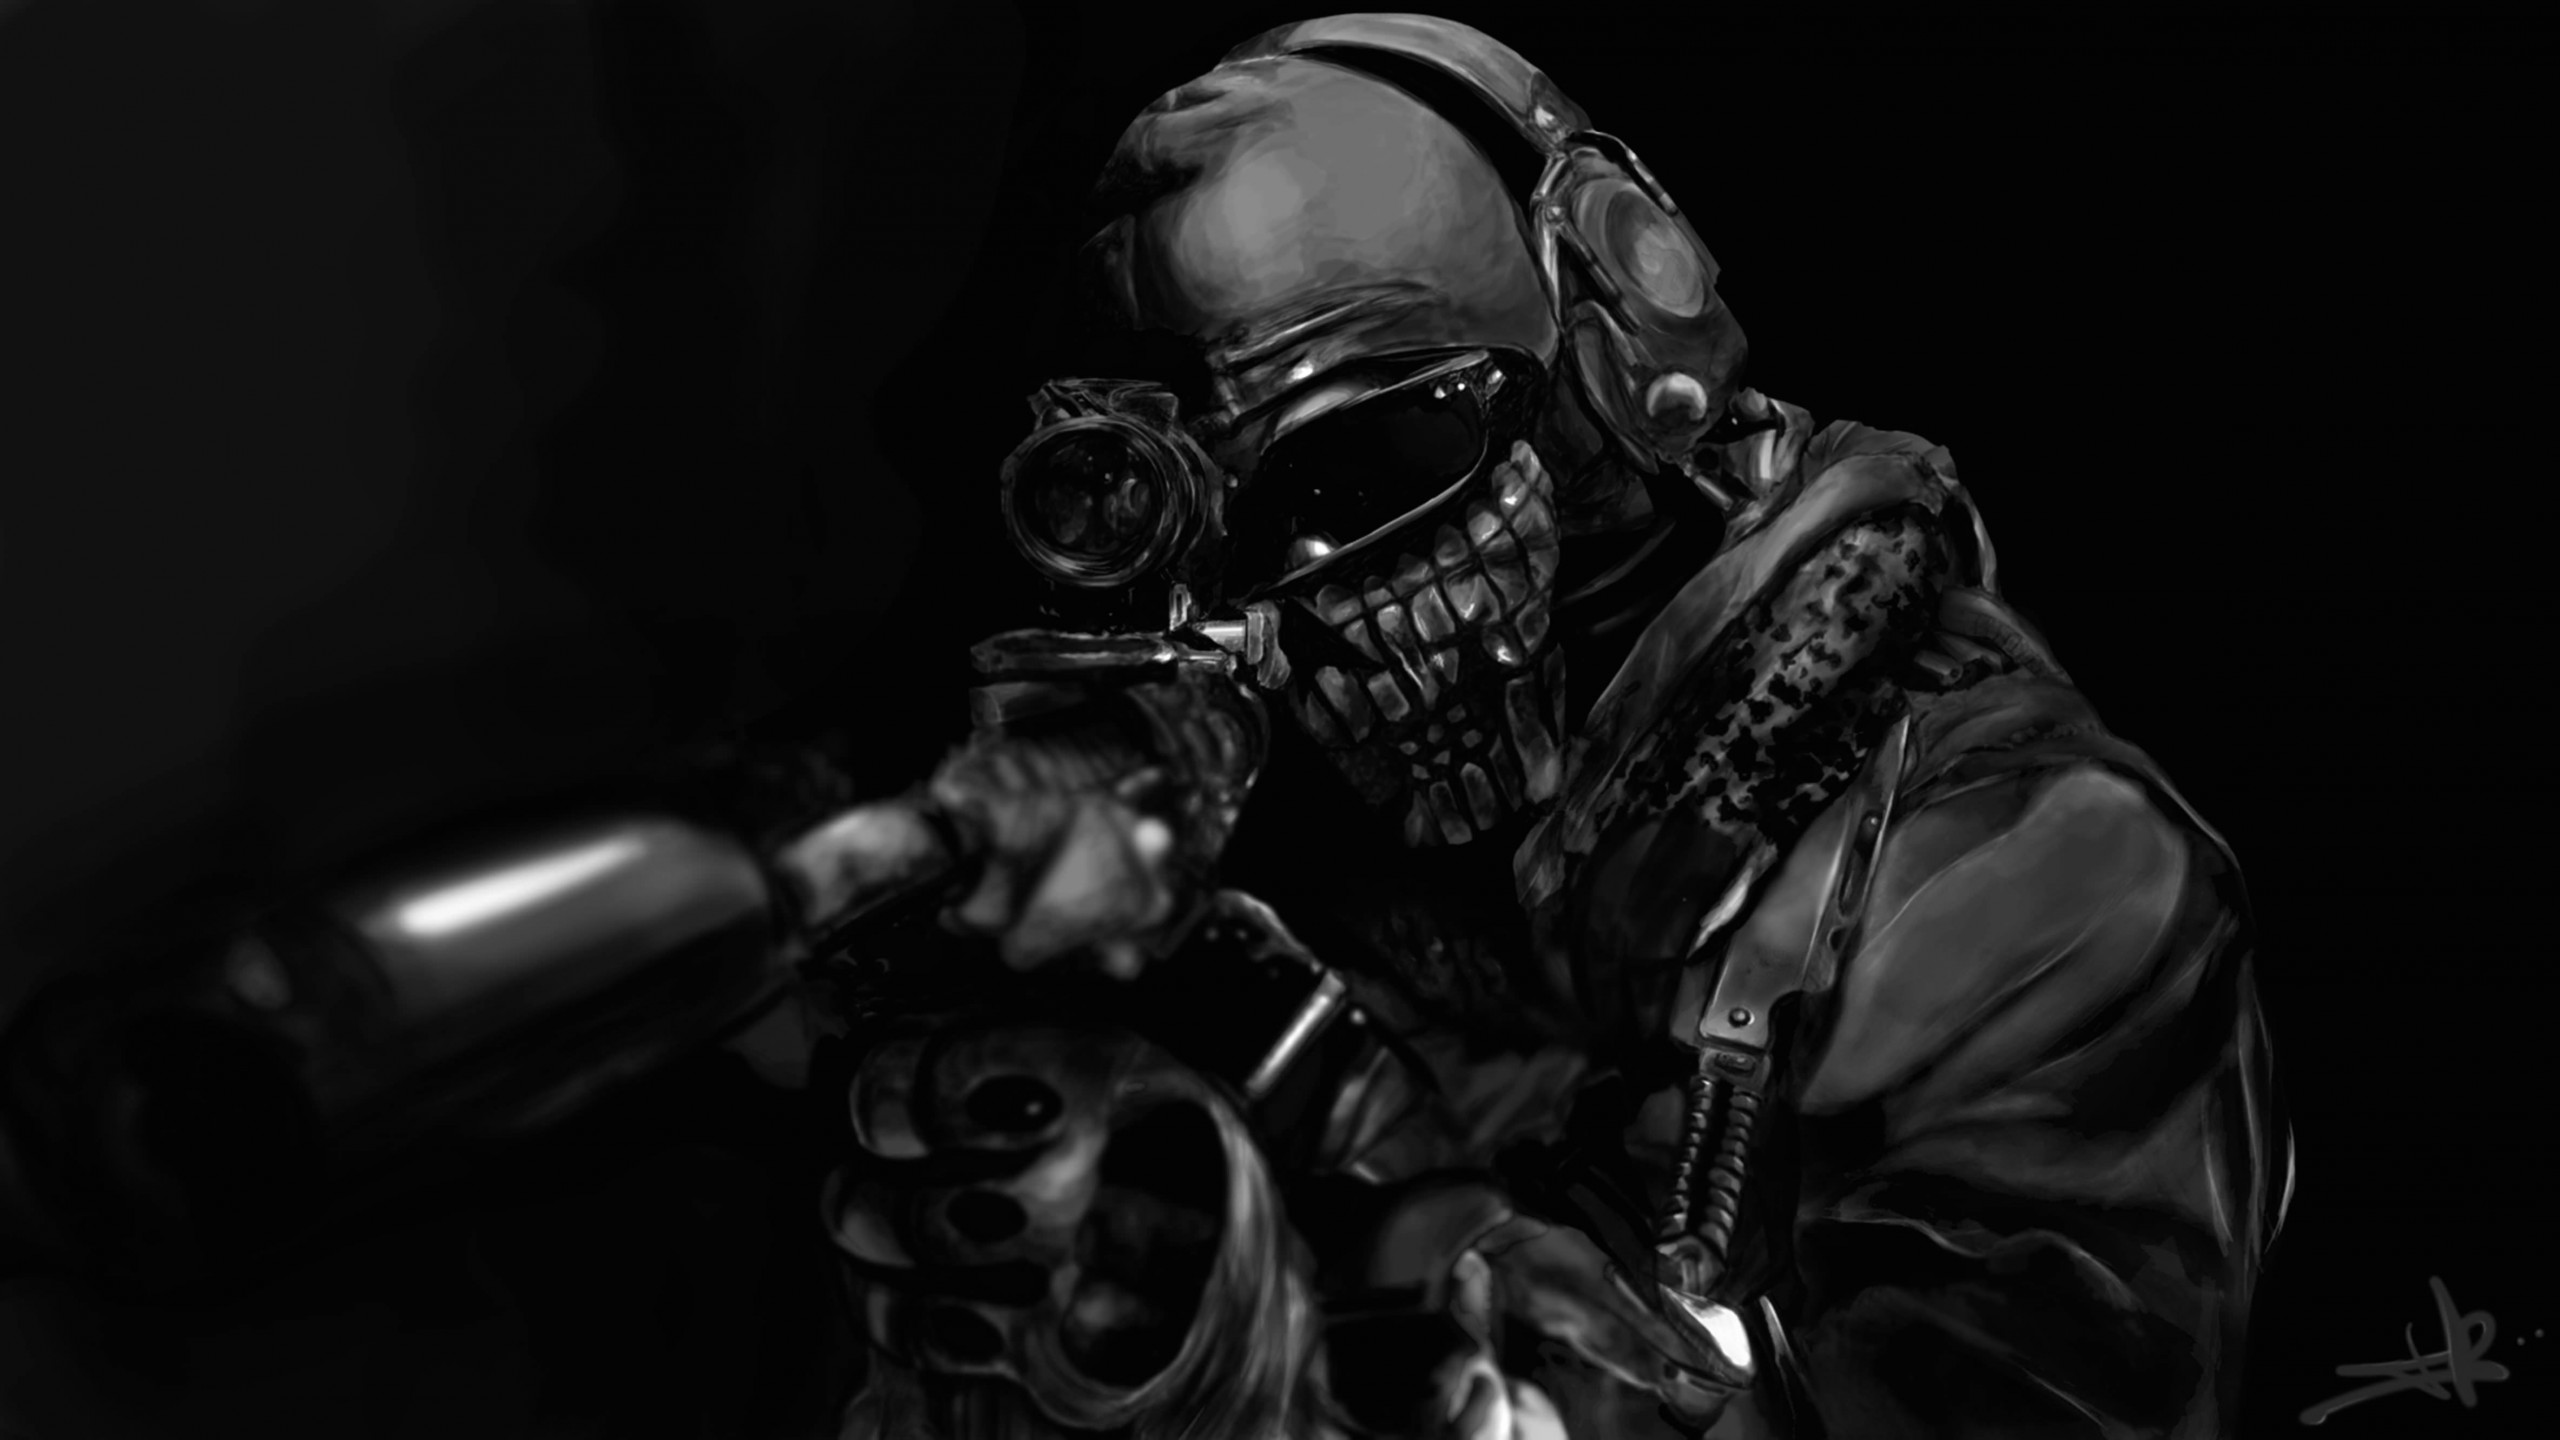 Call of Duty Ghost Masked Warrior Wallpaper for Social Media YouTube Channel Art